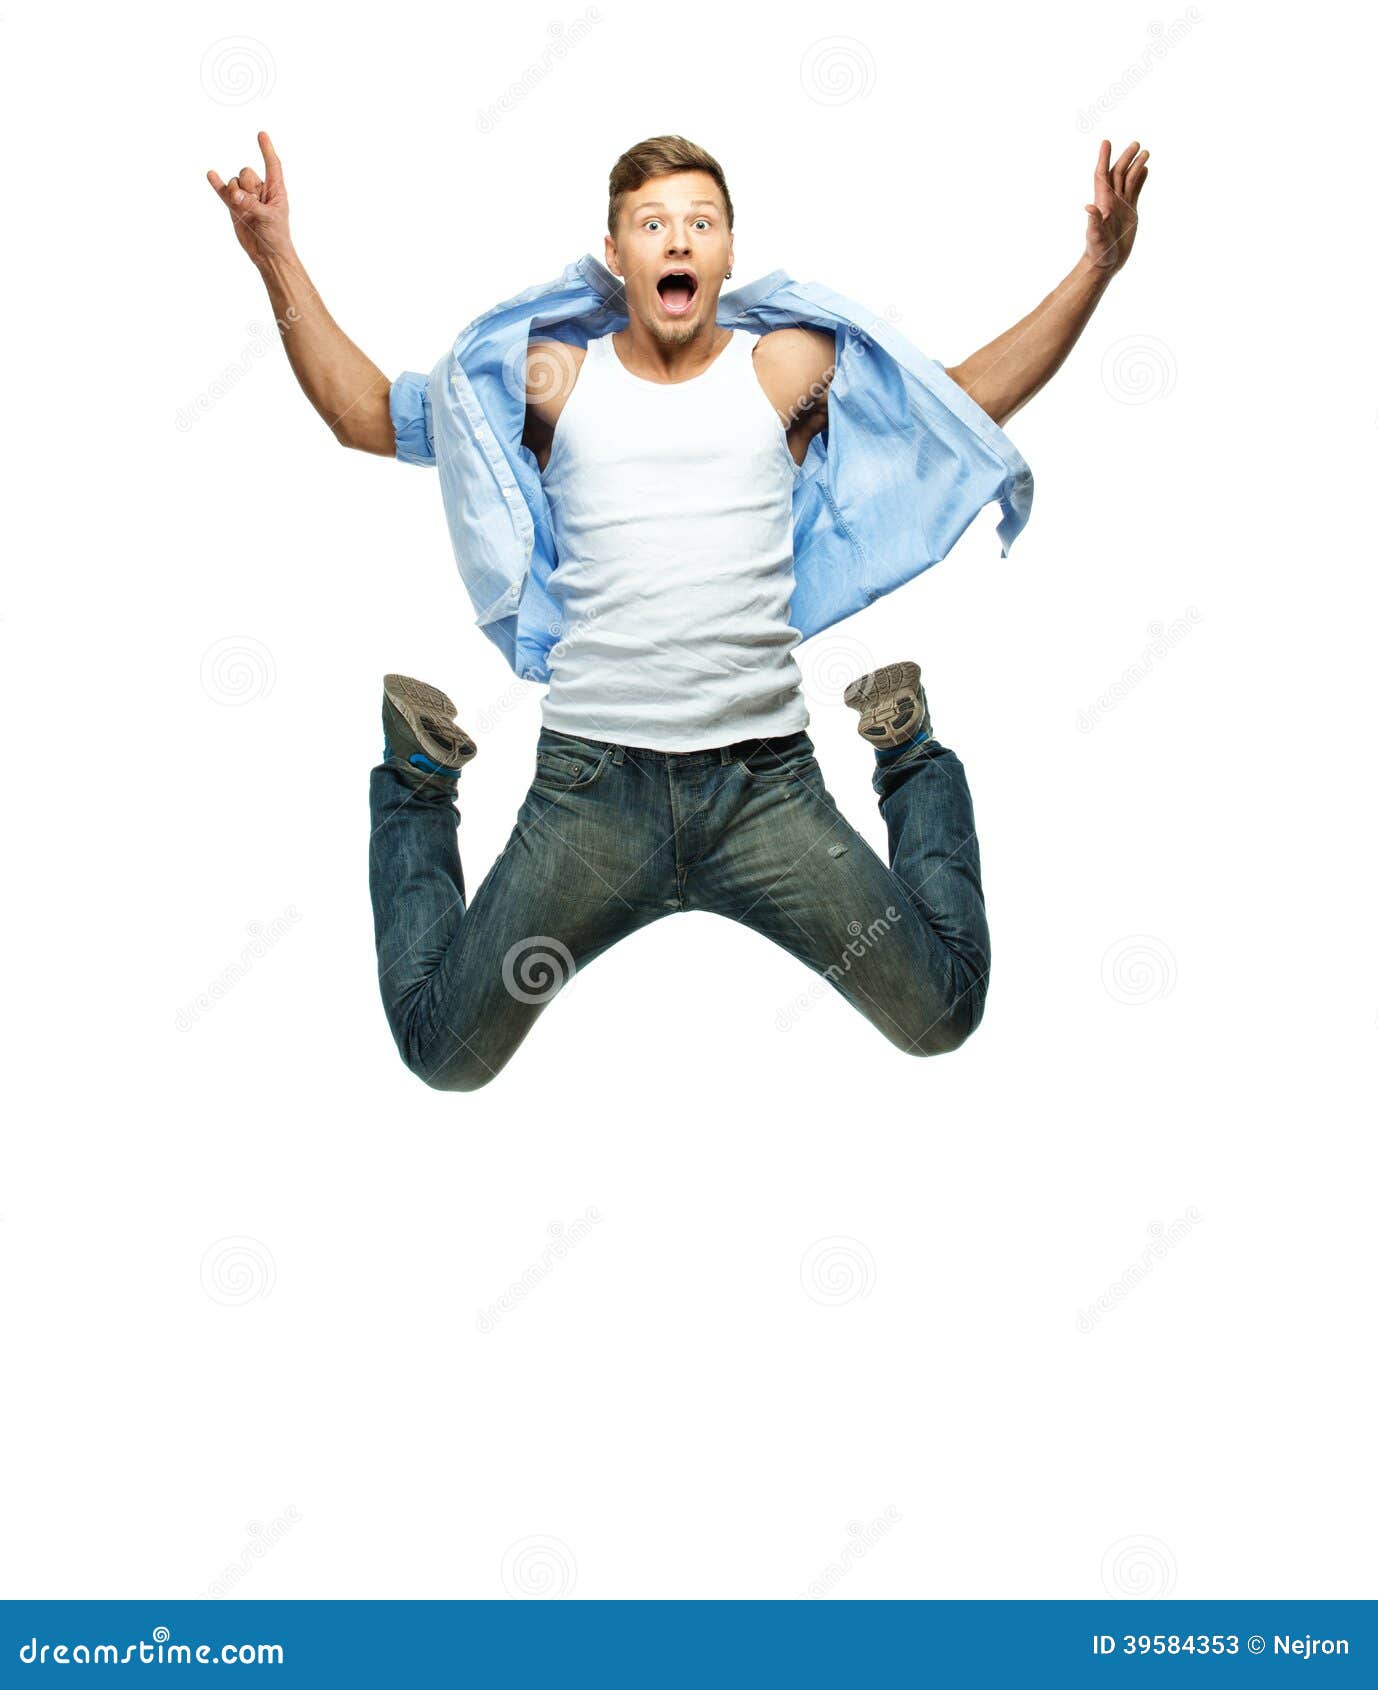 Funny man jumping stock image. Image of casual, background - 39584353